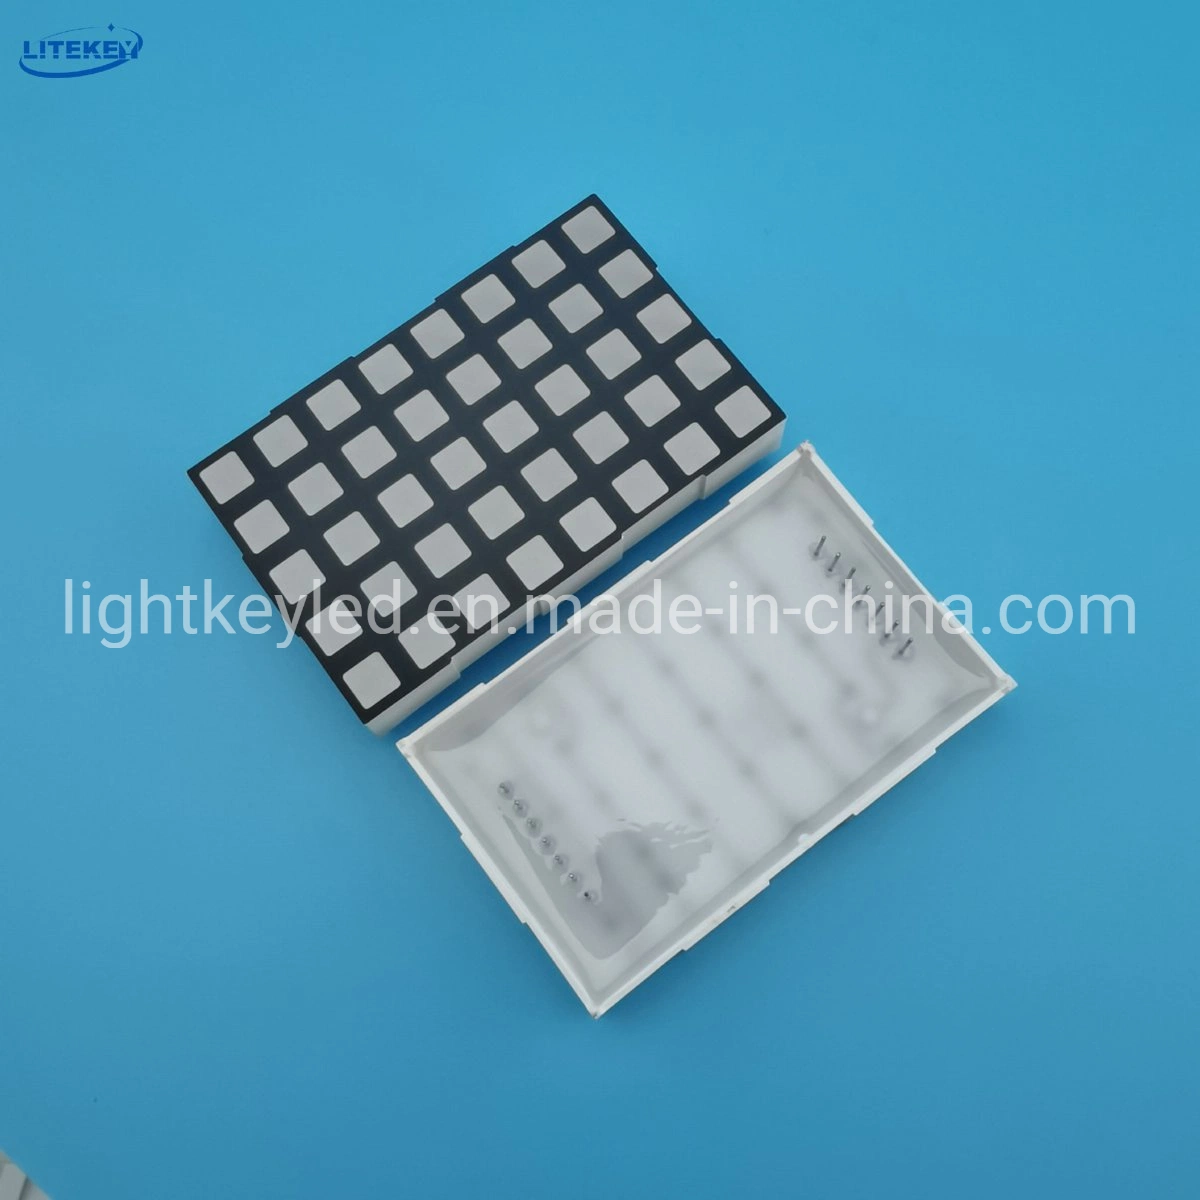 1 Inch 5X7 LED Square DOT Matrix with RoHS From Expert Manufacturer